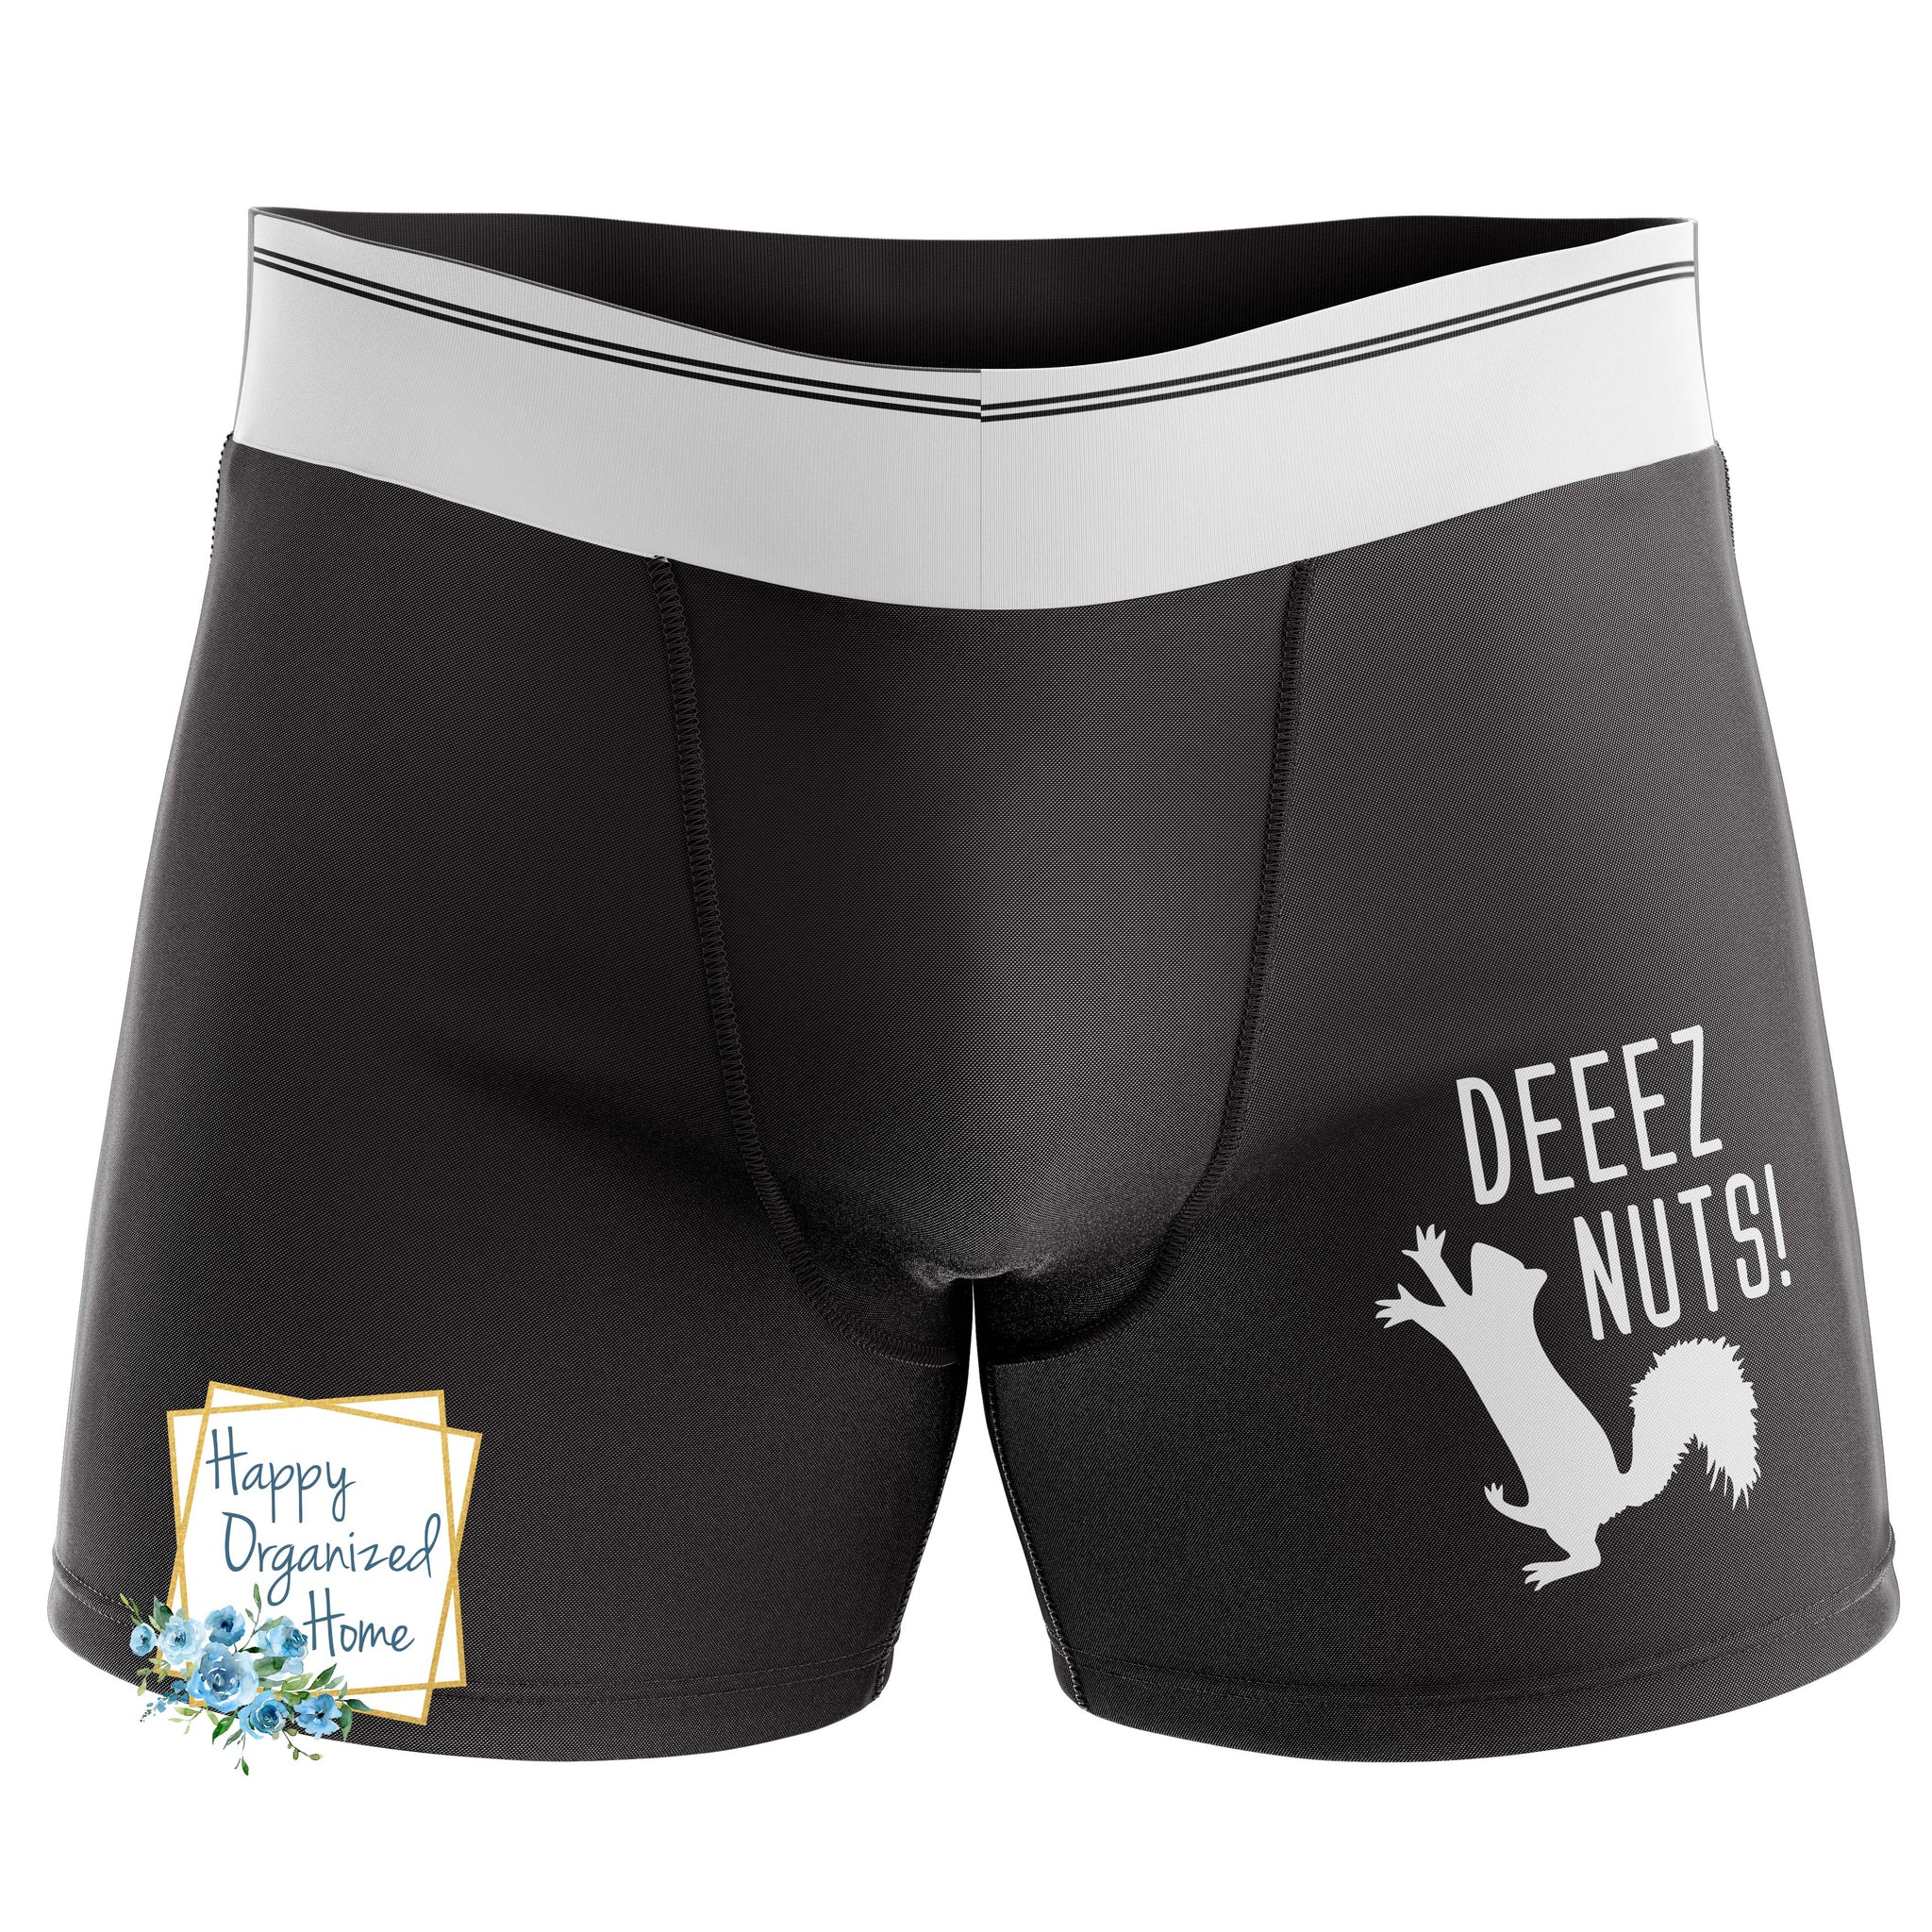 Deez Nuts with Squirrel - Men's Naughty Boxer Briefs – Happy Organized Home